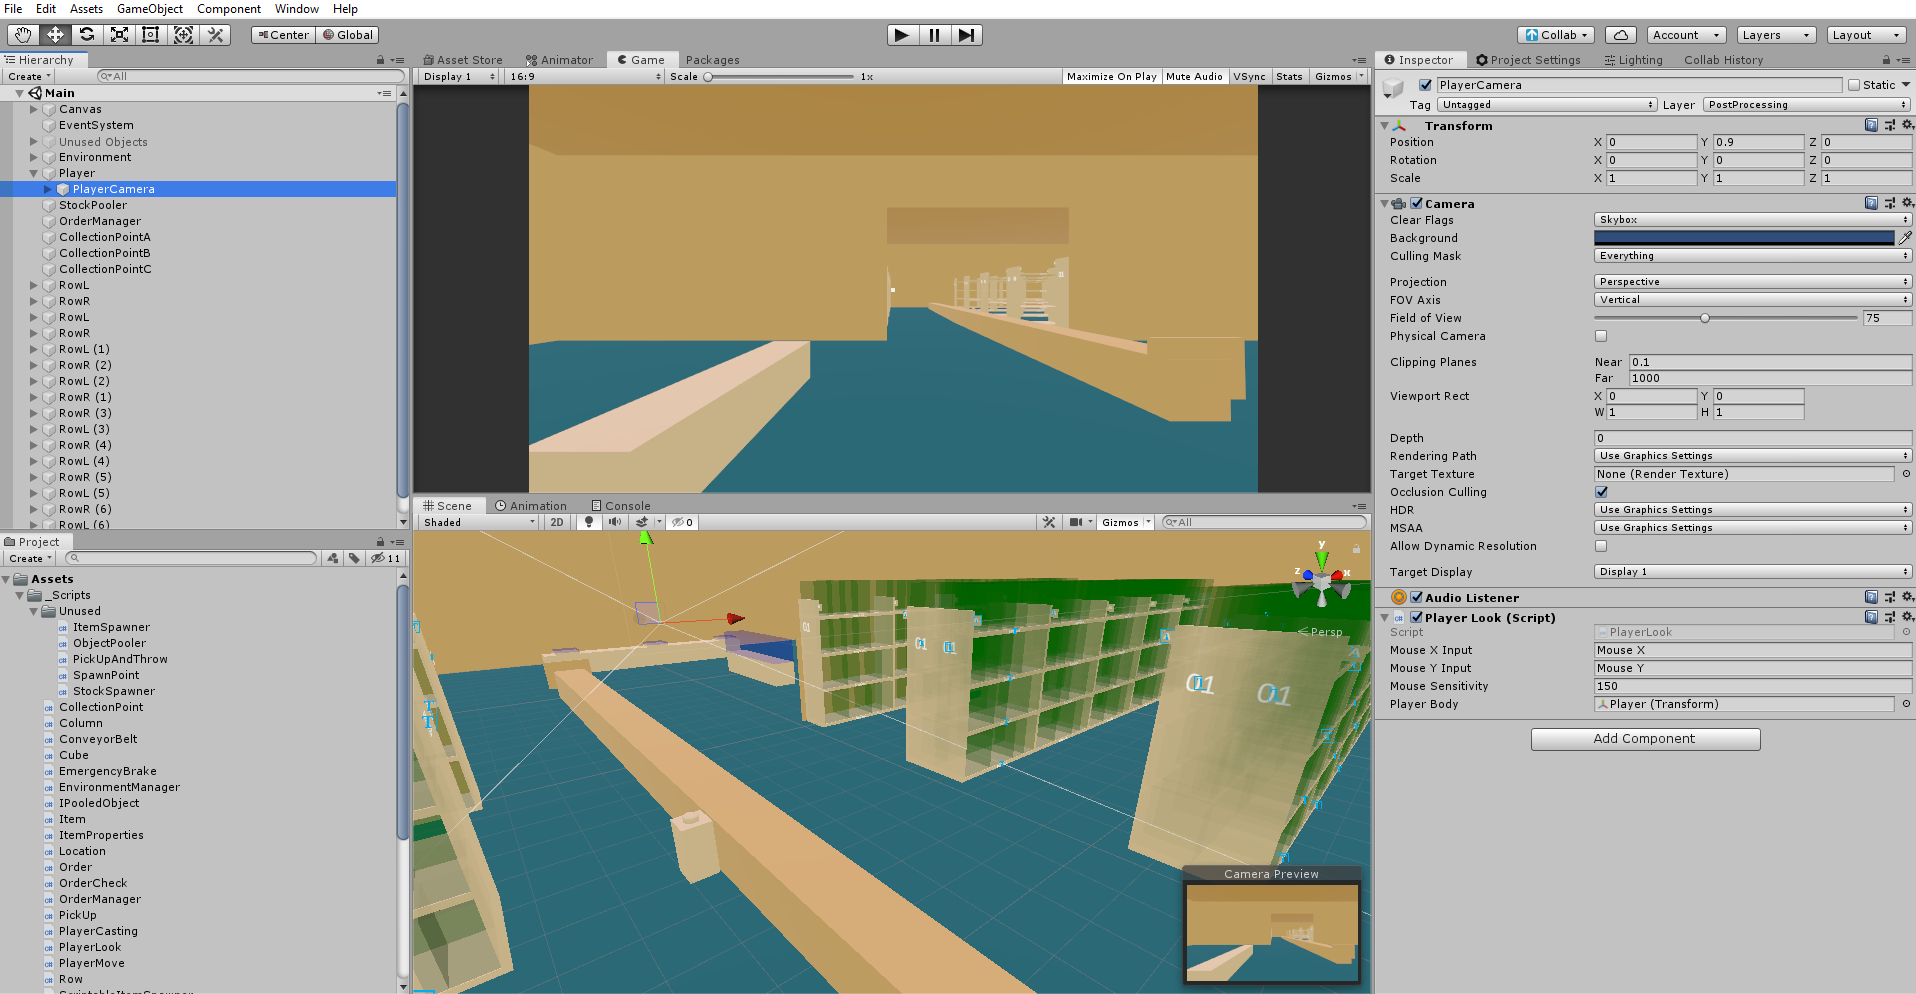 In progress screenshot showing the Unity game engine editor.